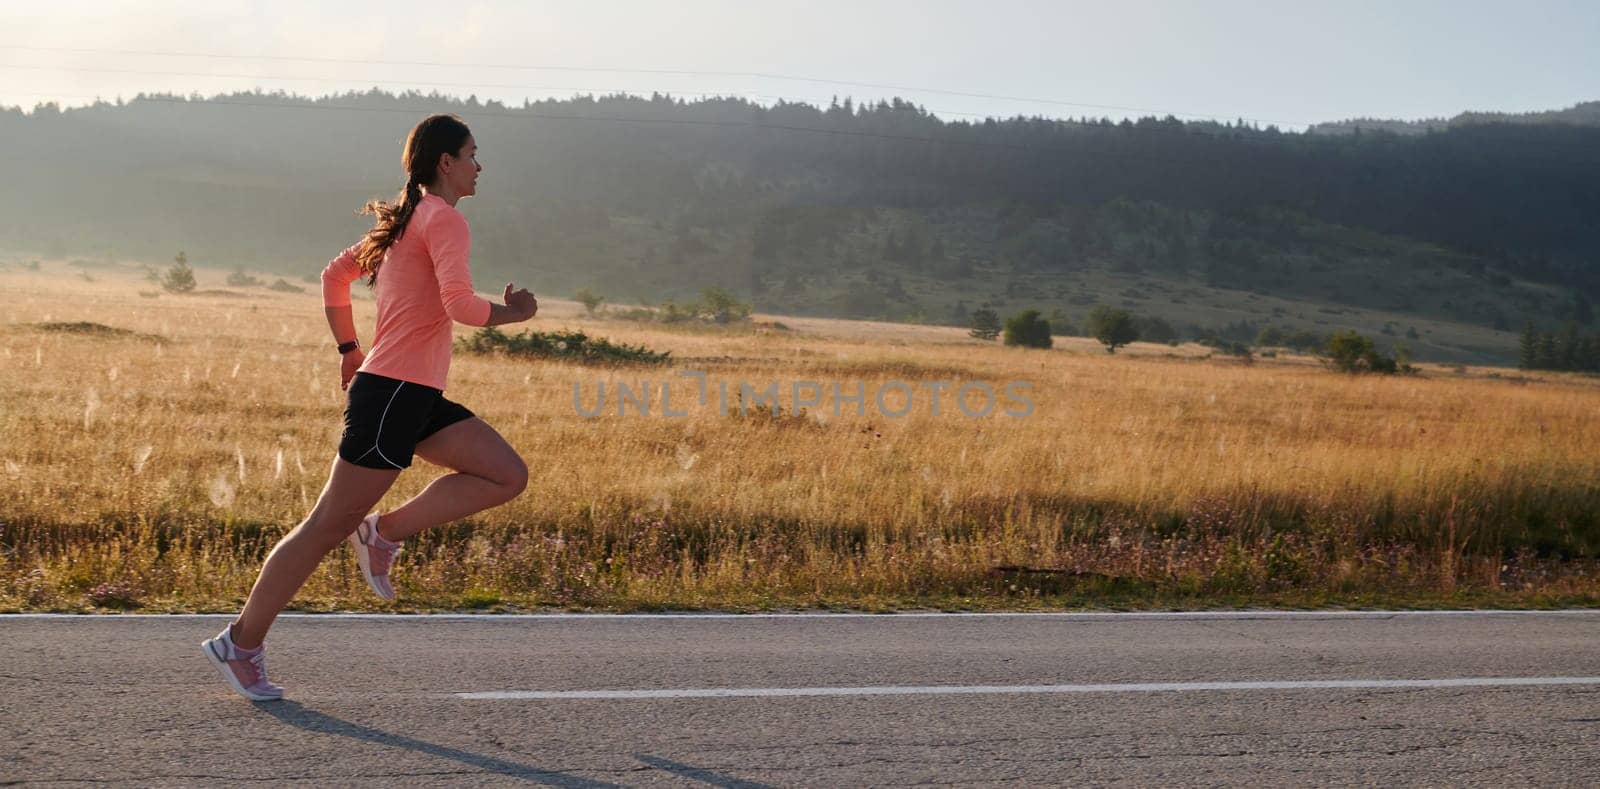 A resolute and motivated athlete running confidently into the sunrise, epitomizing determination and empowerment in her early morning run.